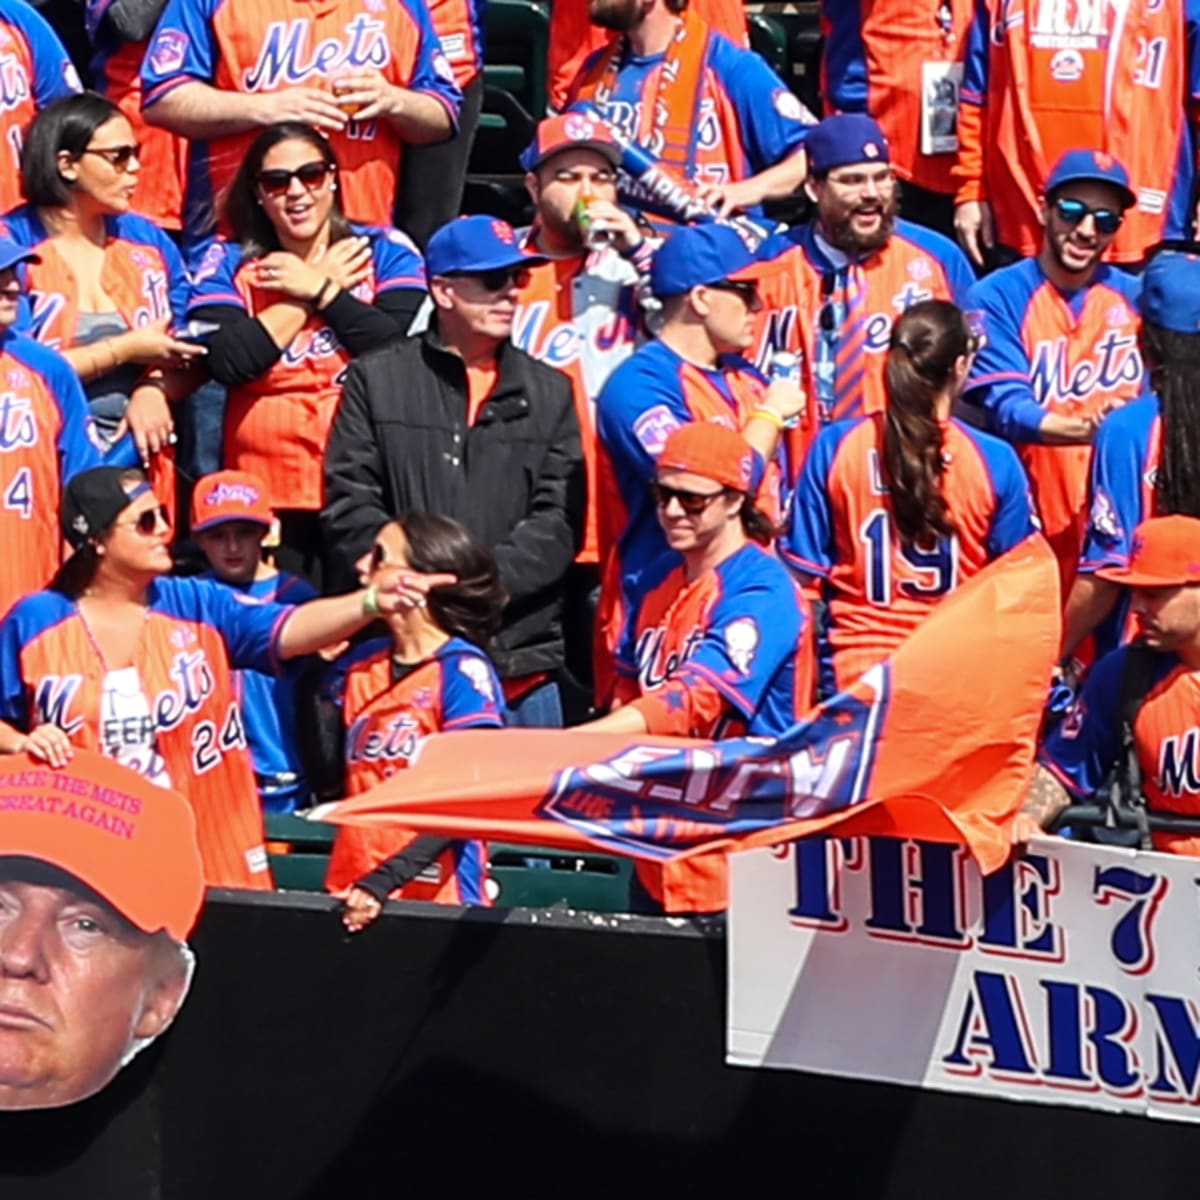 The 7 Line Army in MLB The Show 2021  Can't wait to roll this deep again  with The 7 Line Army. YES, we're in MLB The Show again! Never gets old.